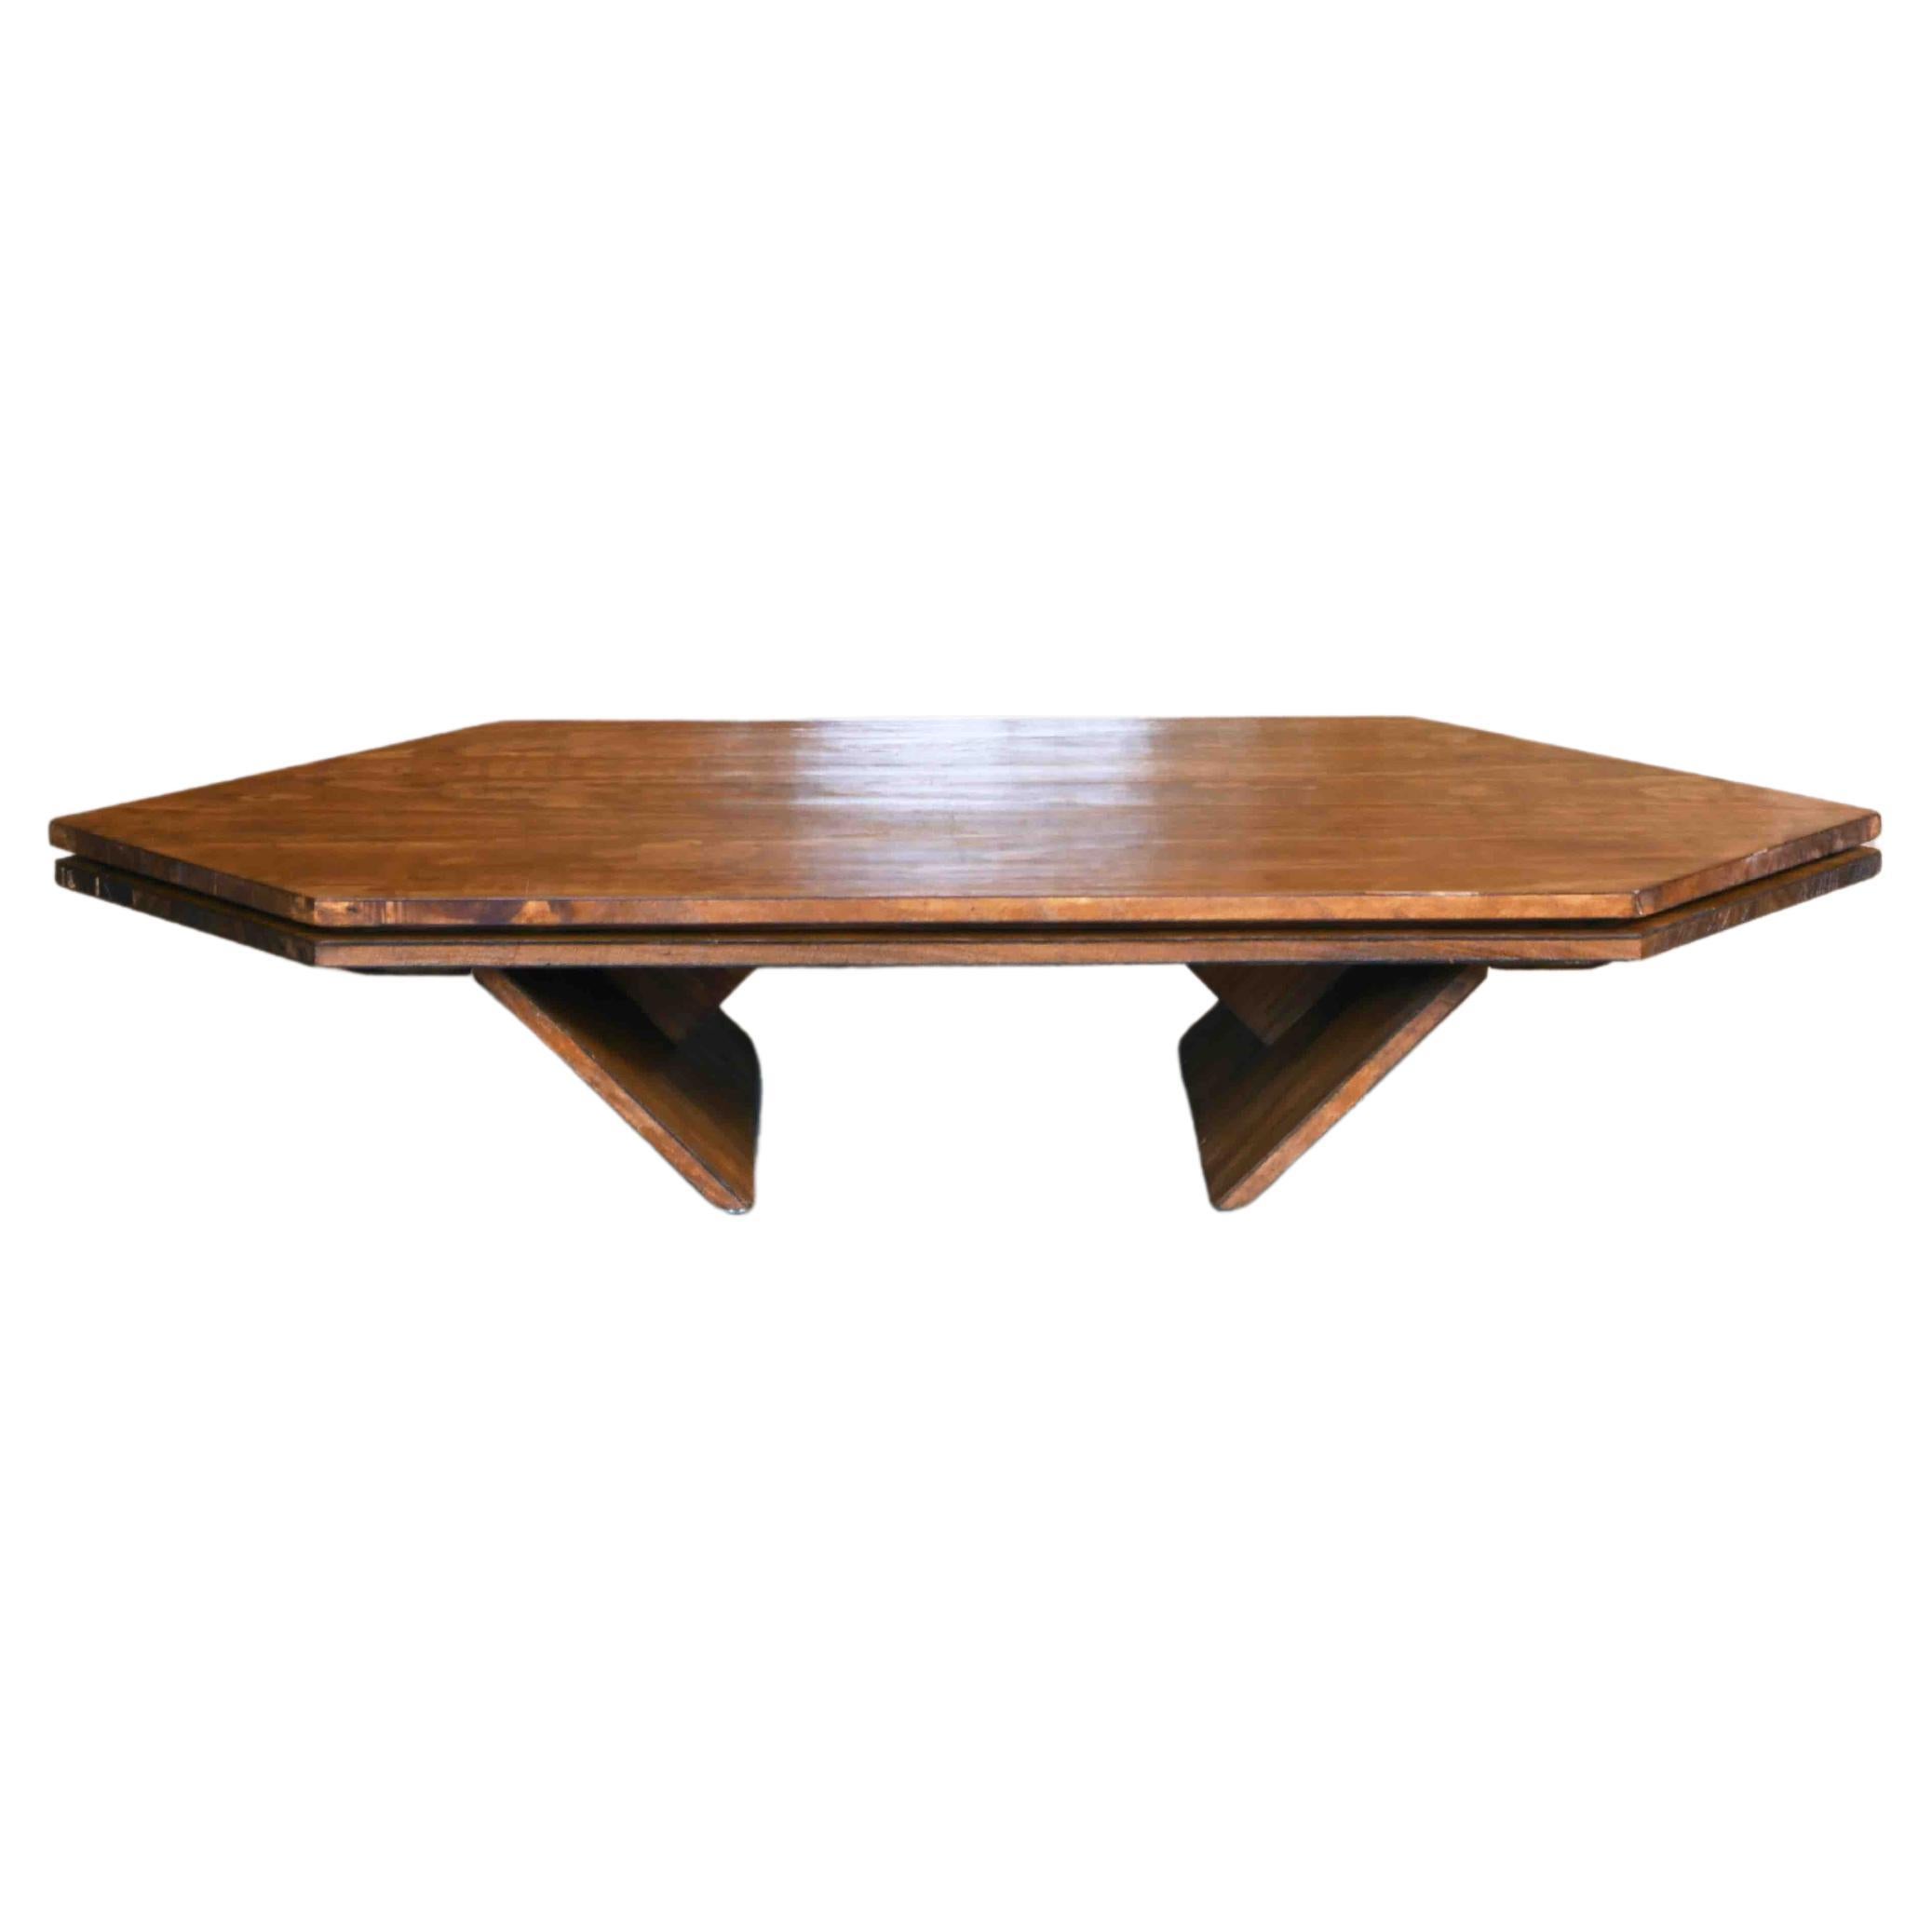 Hervé Baley, Wooden Coffee Table, C. 1991-1992